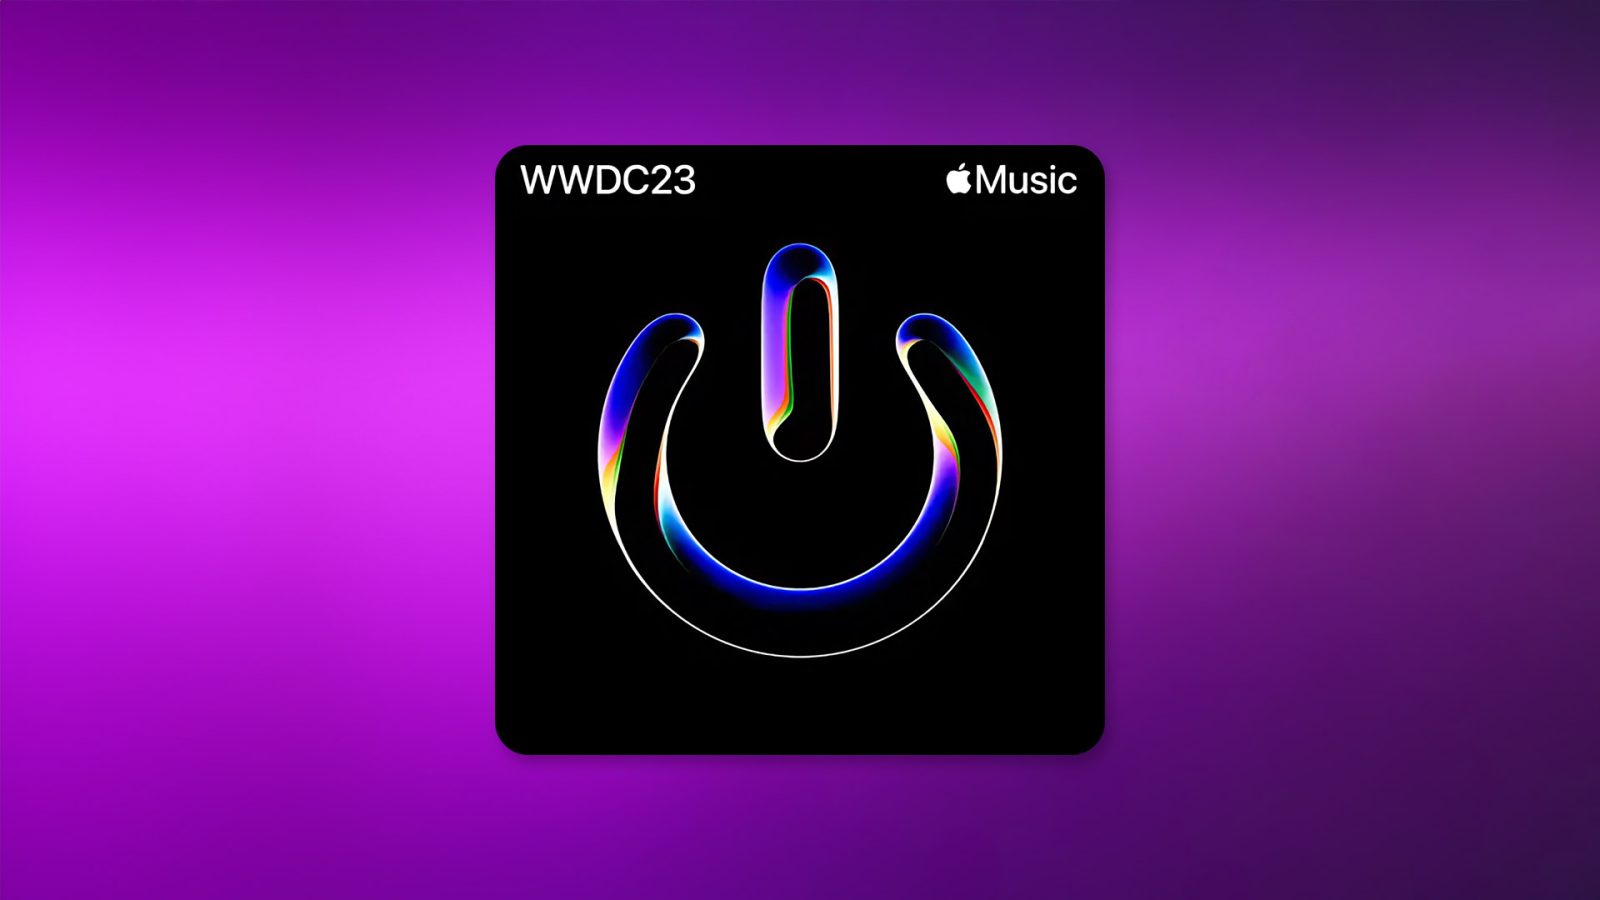 Apple promotes WWDC 2023 with Apple Music playlist, teases 'a new era begins' on Twitter